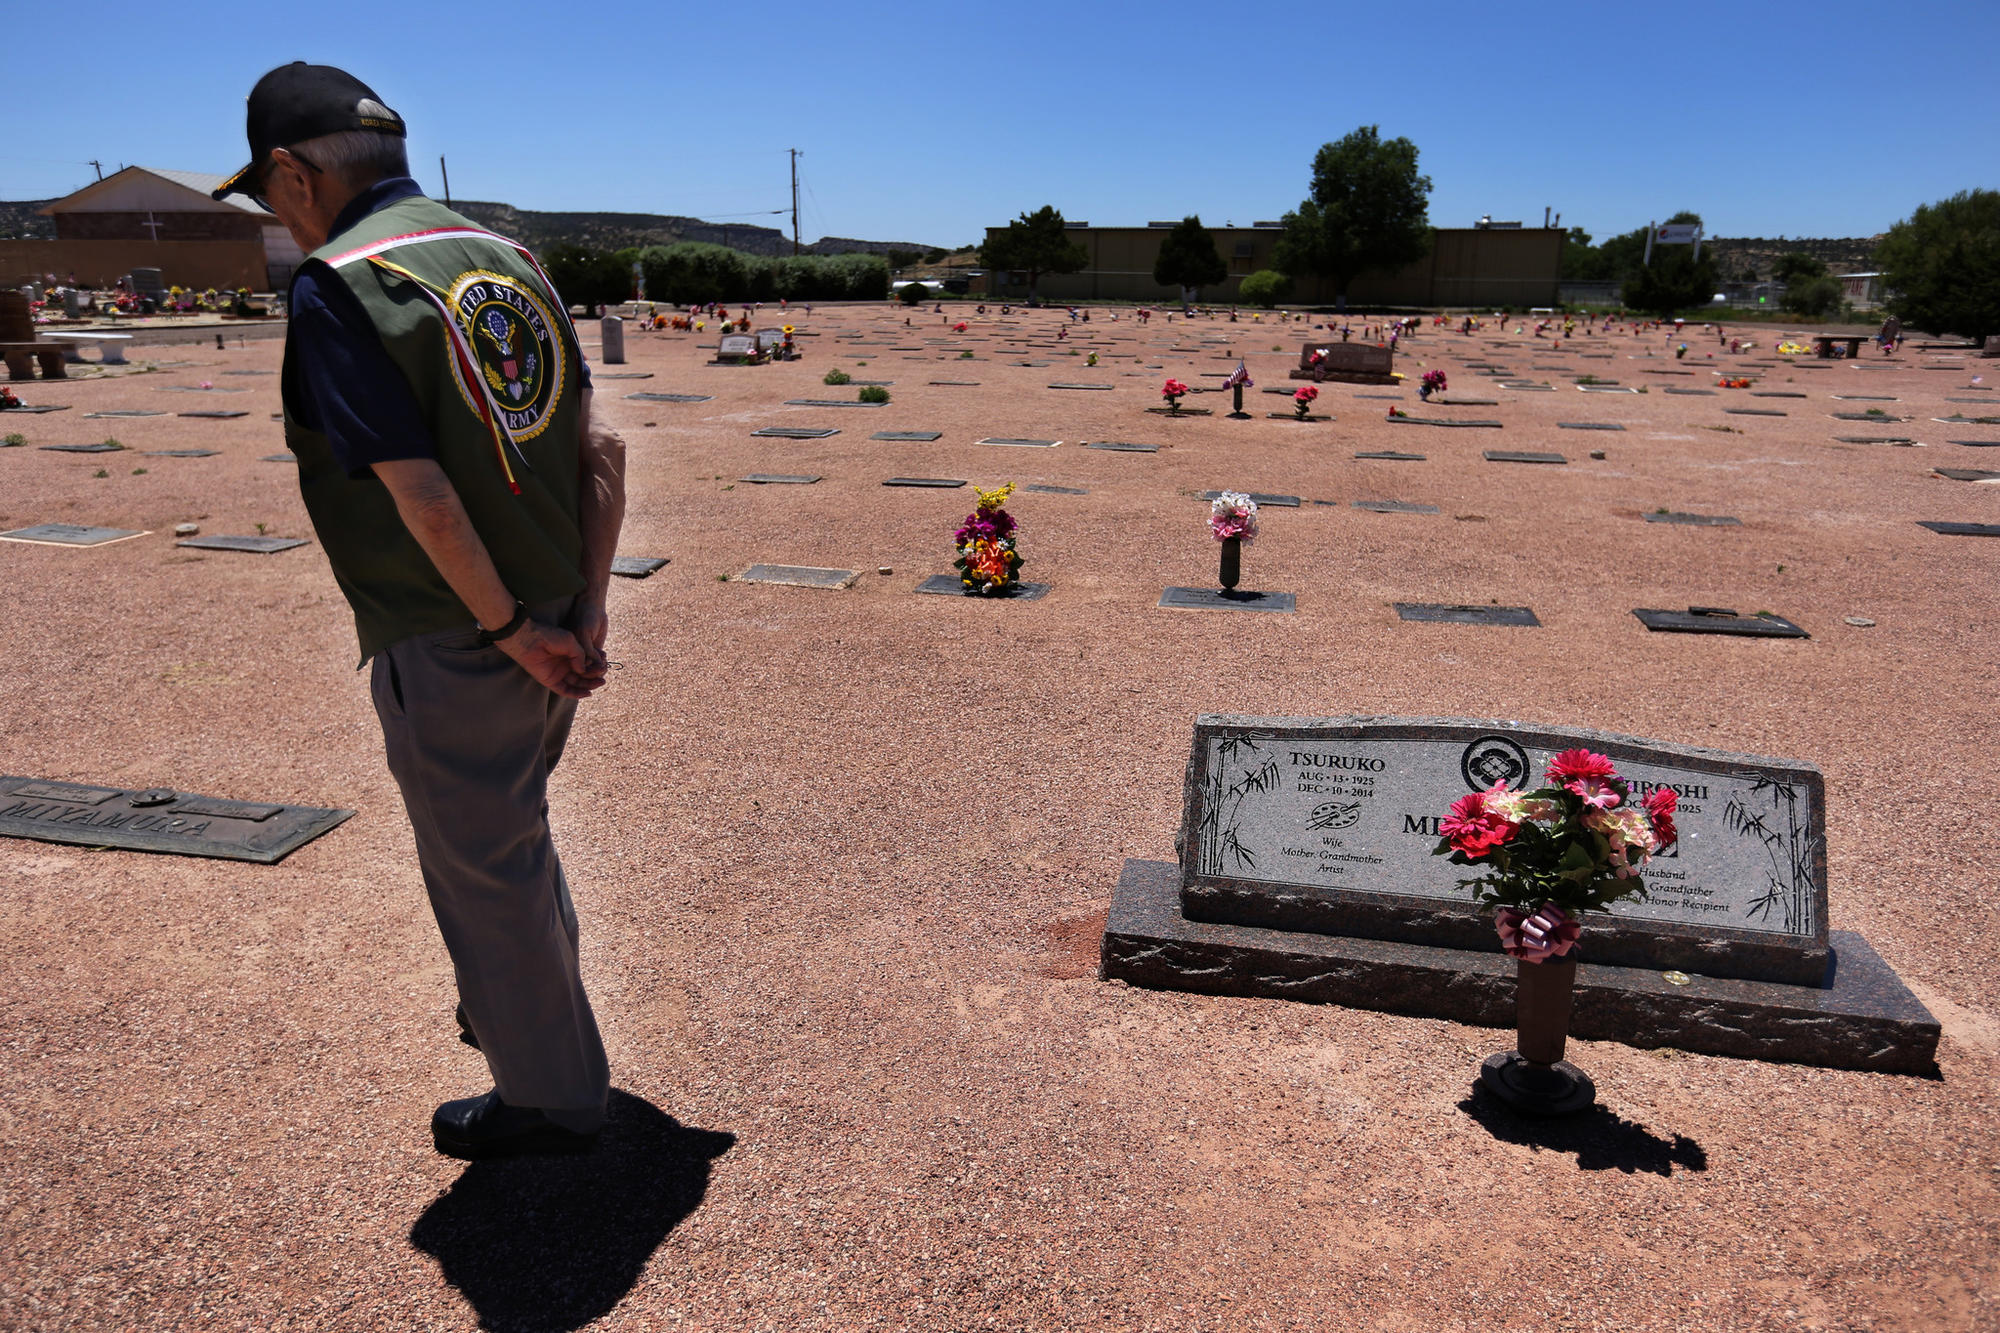 Hiroshi Miyamura visits the grave where his wife, Terry, is buried. His wife died two years ago, and he still lives in the ranch house in which they raised three children.